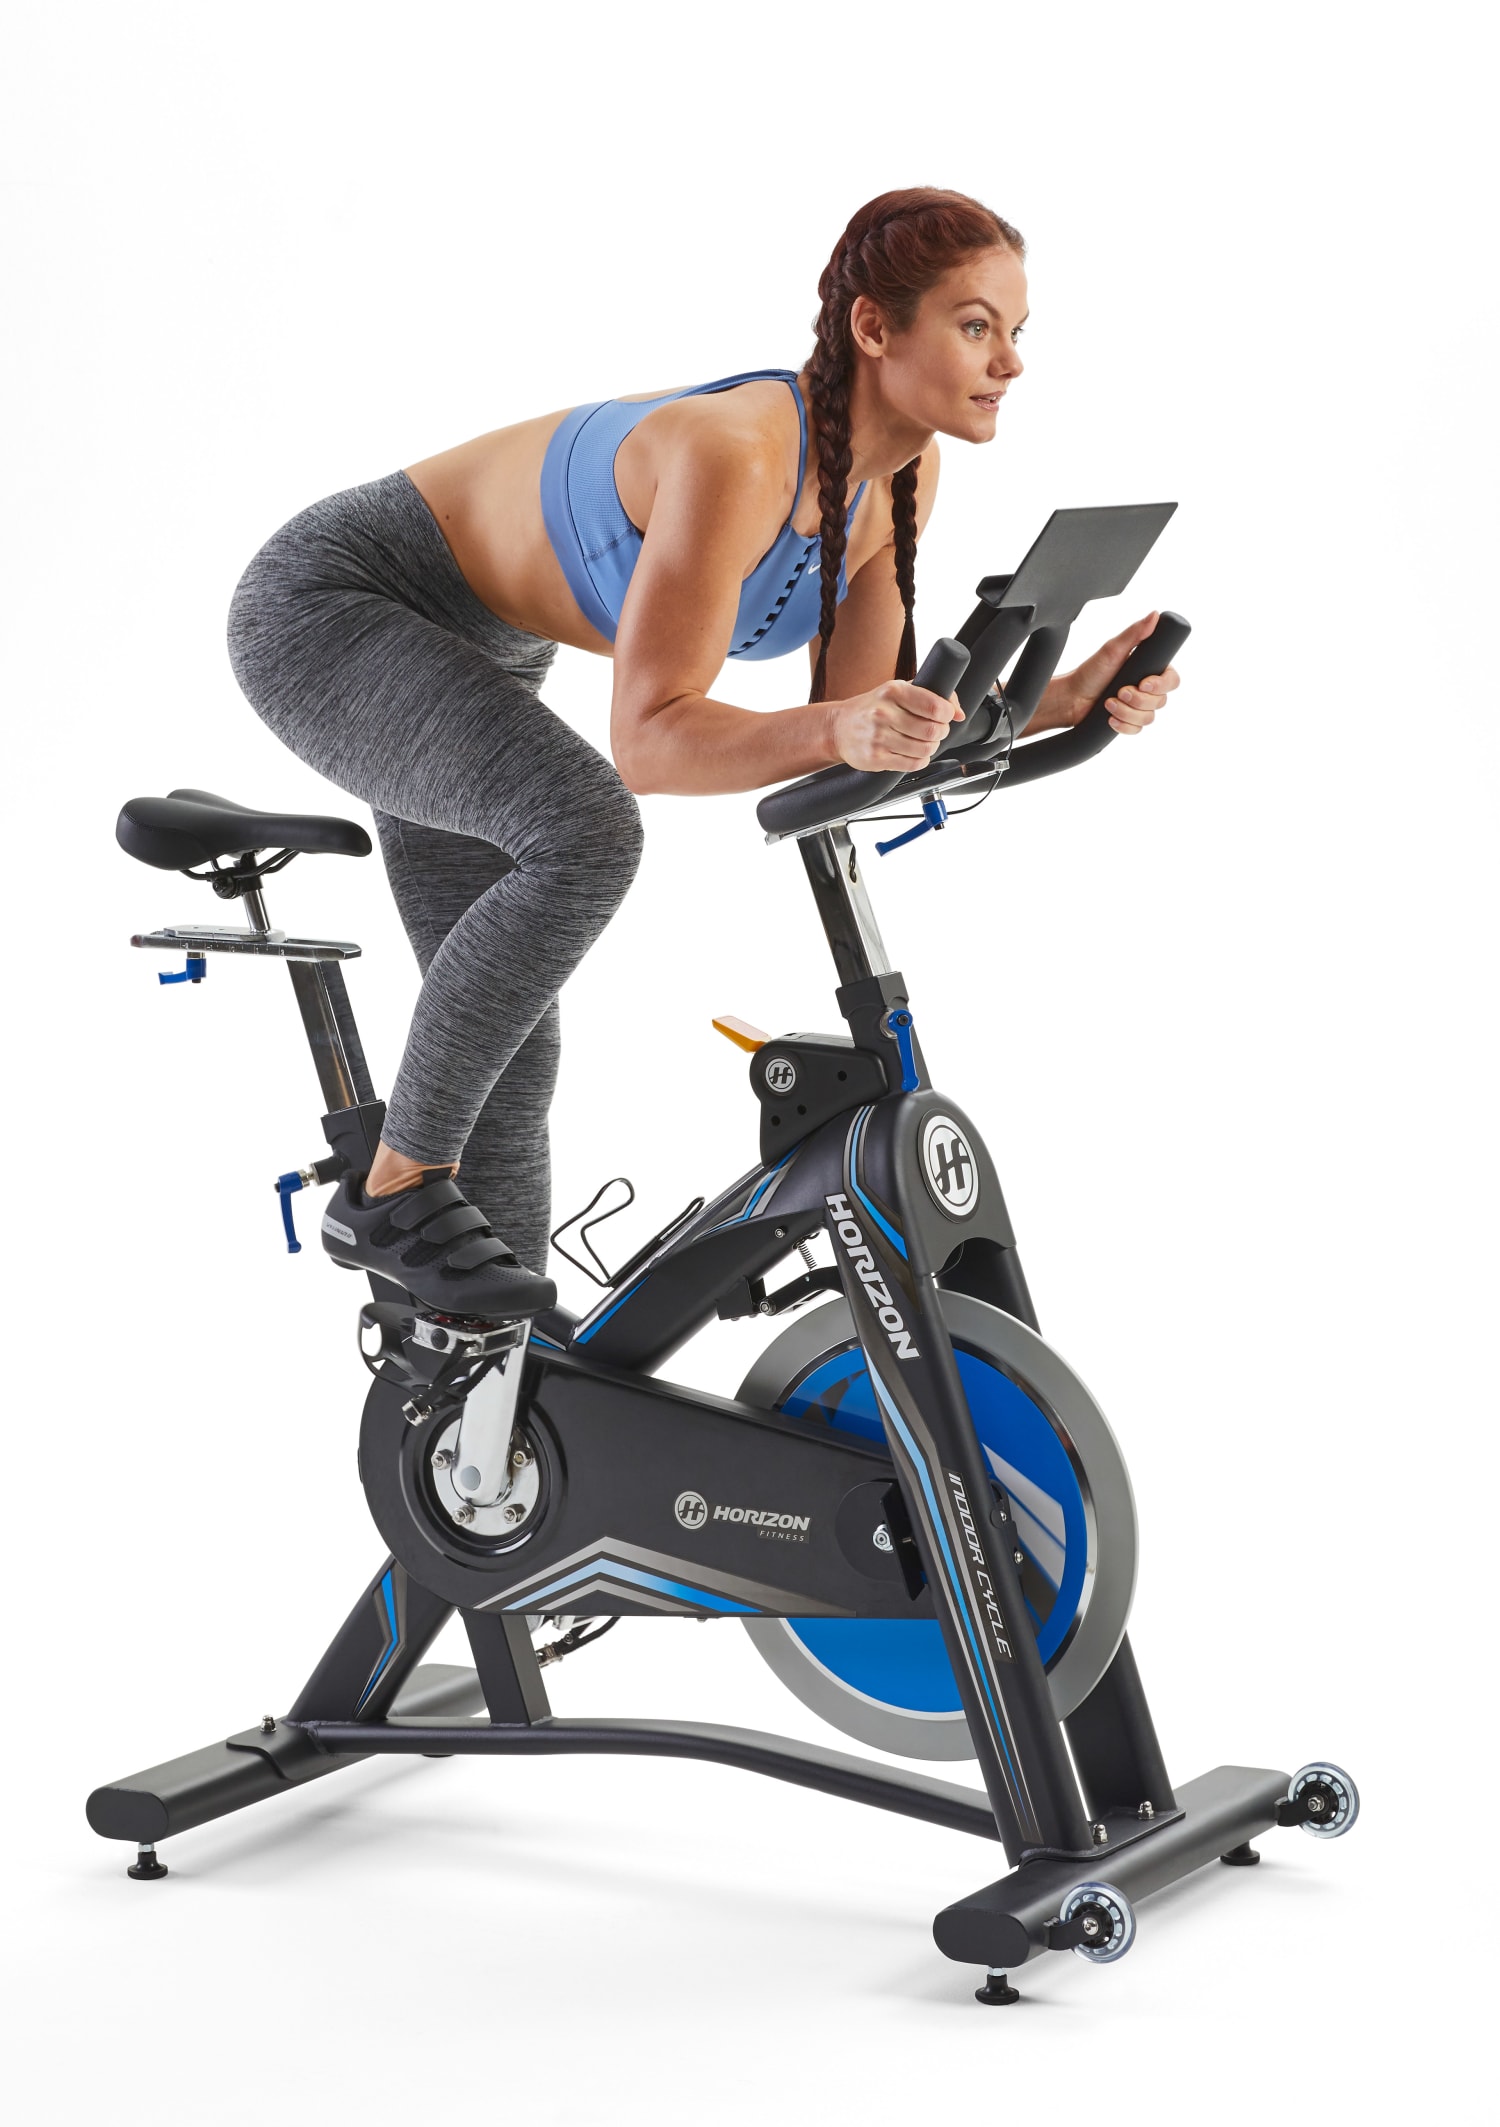 peloton indoor exercise bike with hd touch screen